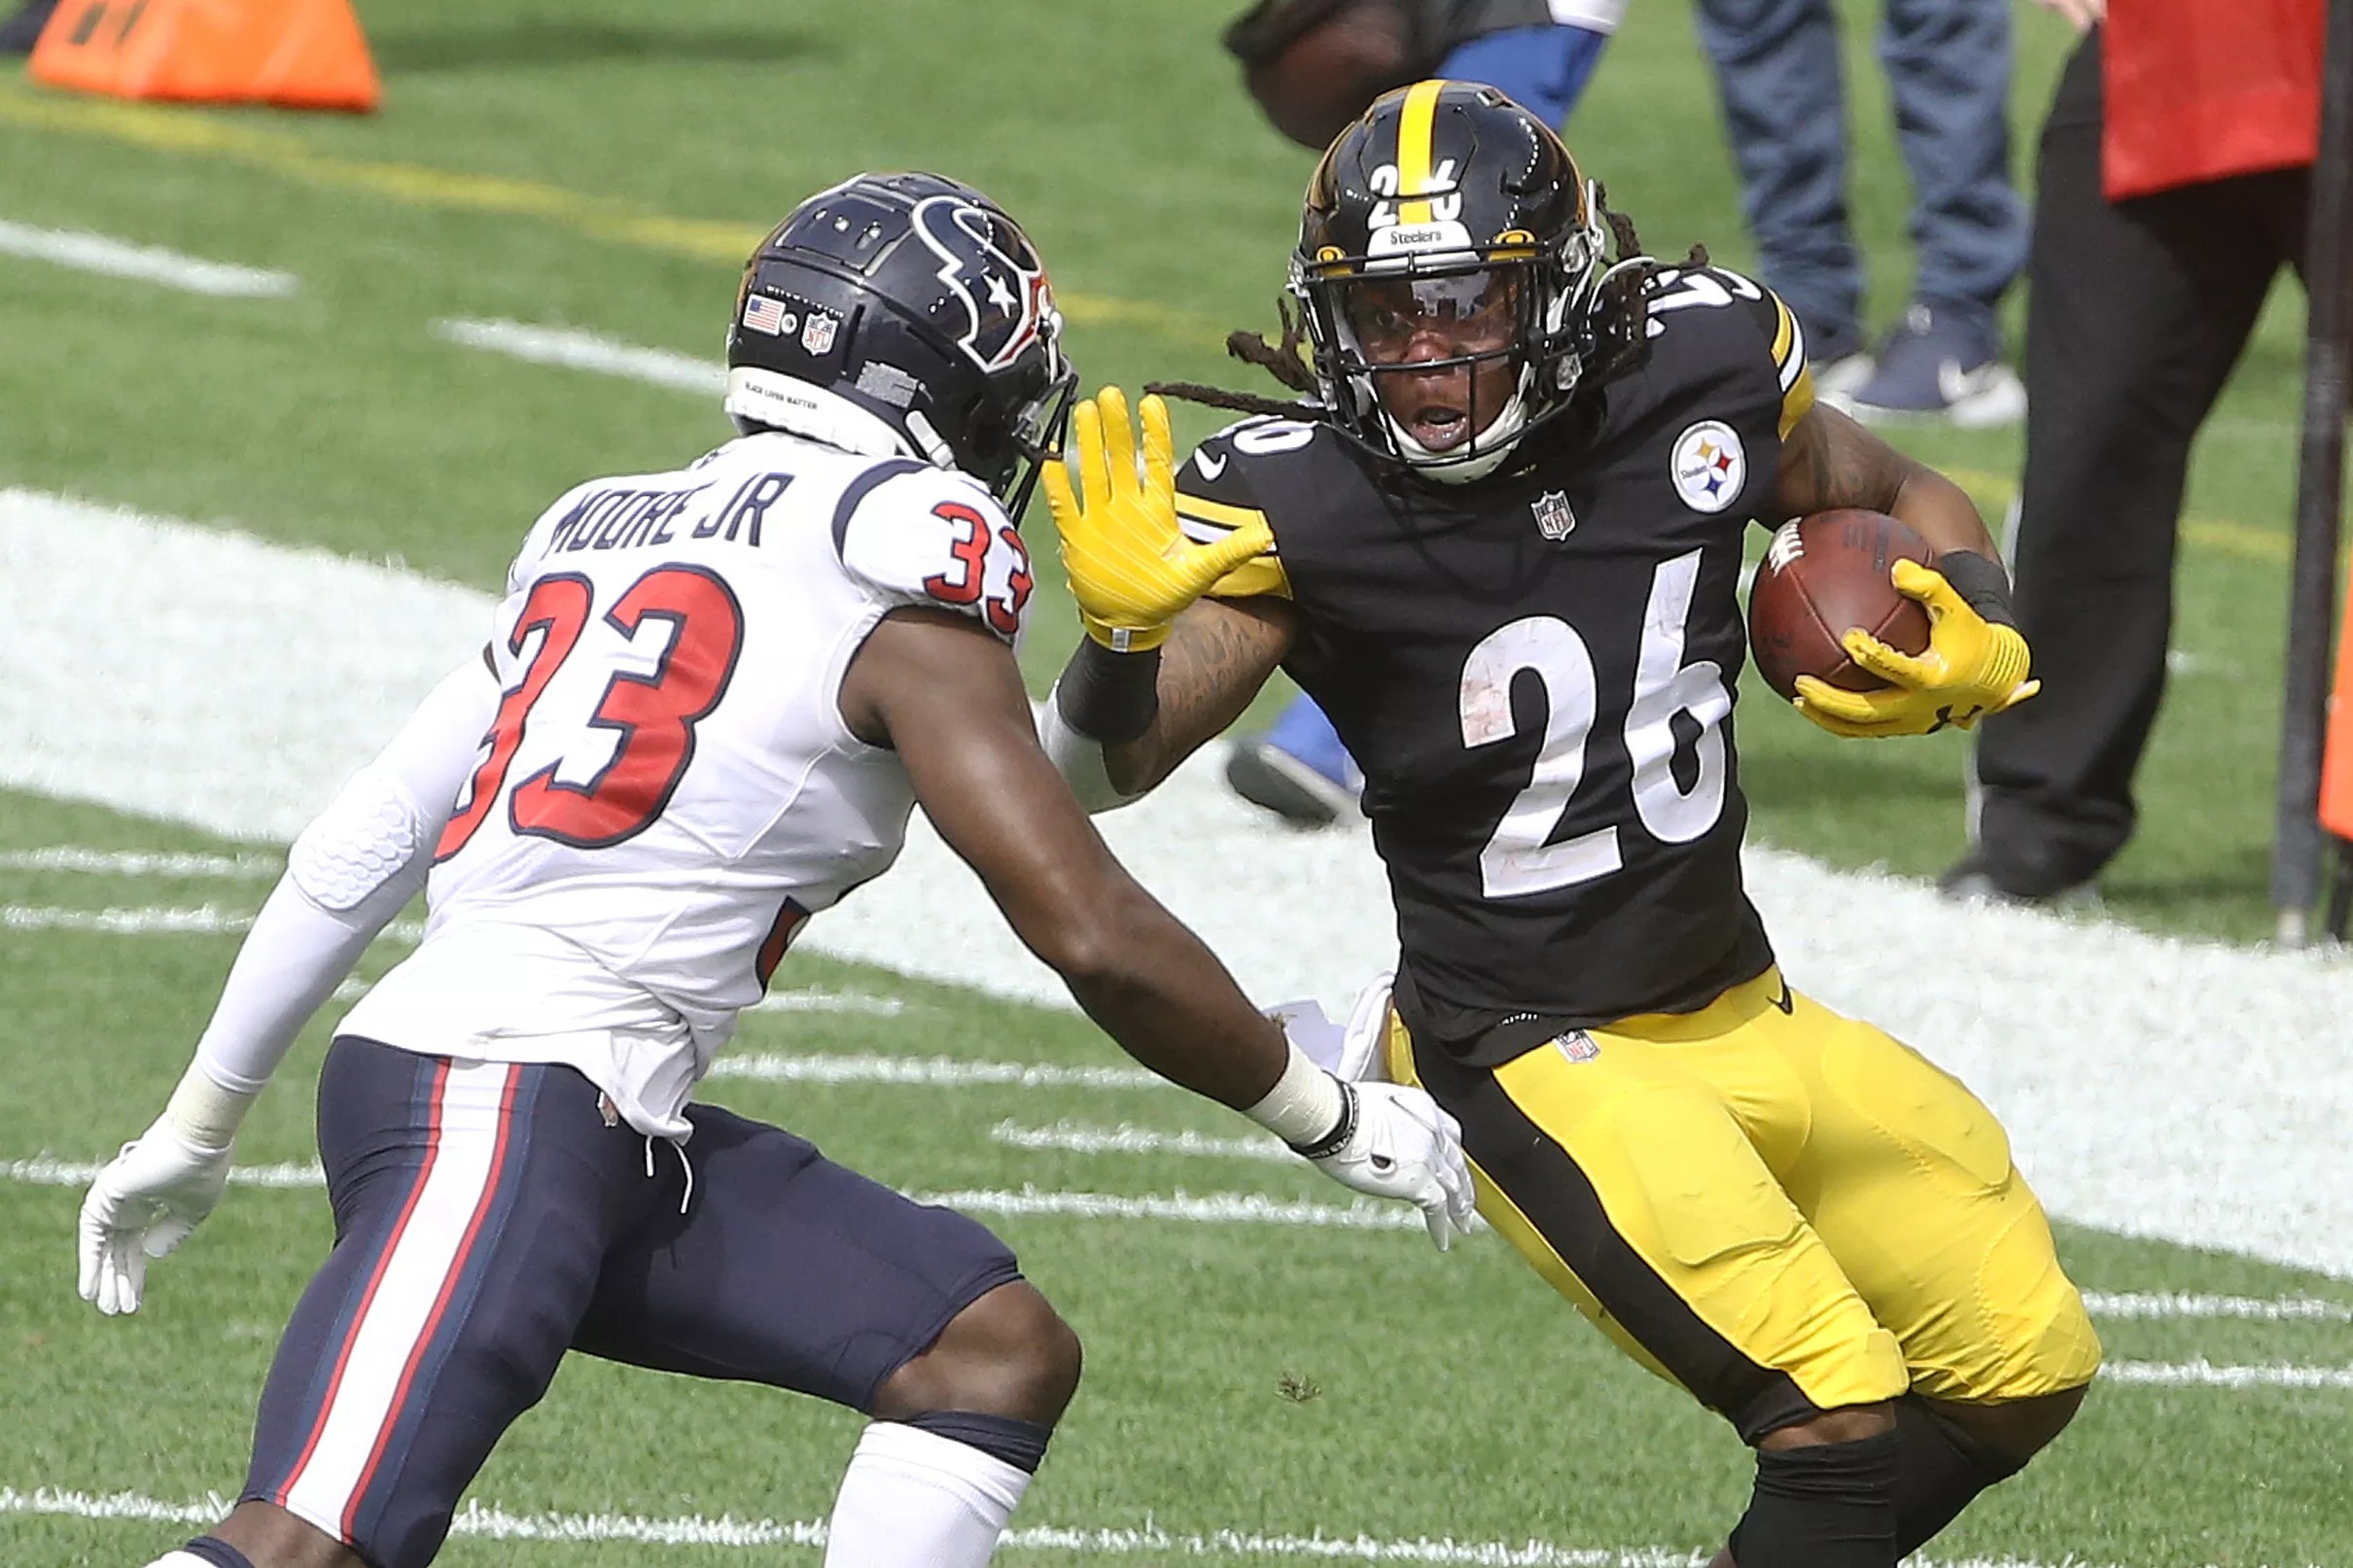 The Steelers offense flexed its depth vs. the Texans in Week 3